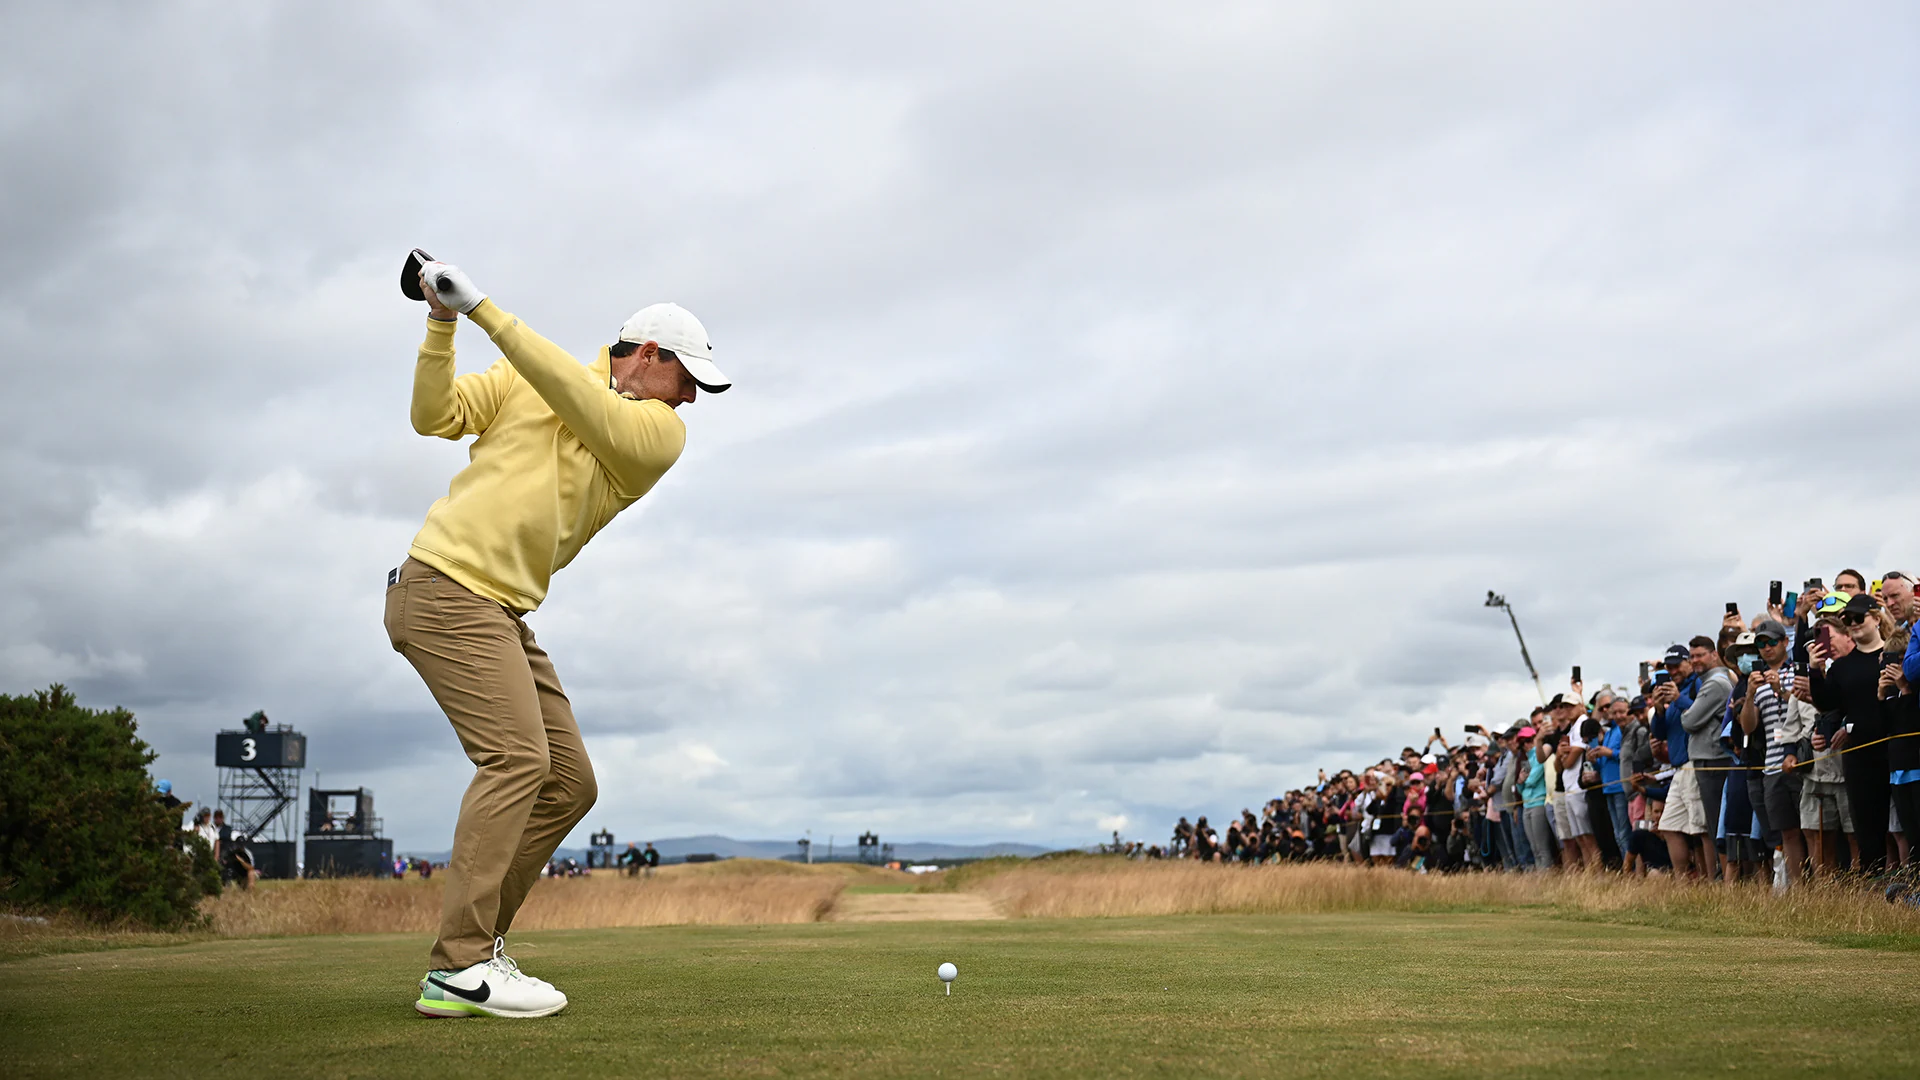 2022 British Open: Rory McIlroy's drive hits ancient stone, still results in birdie